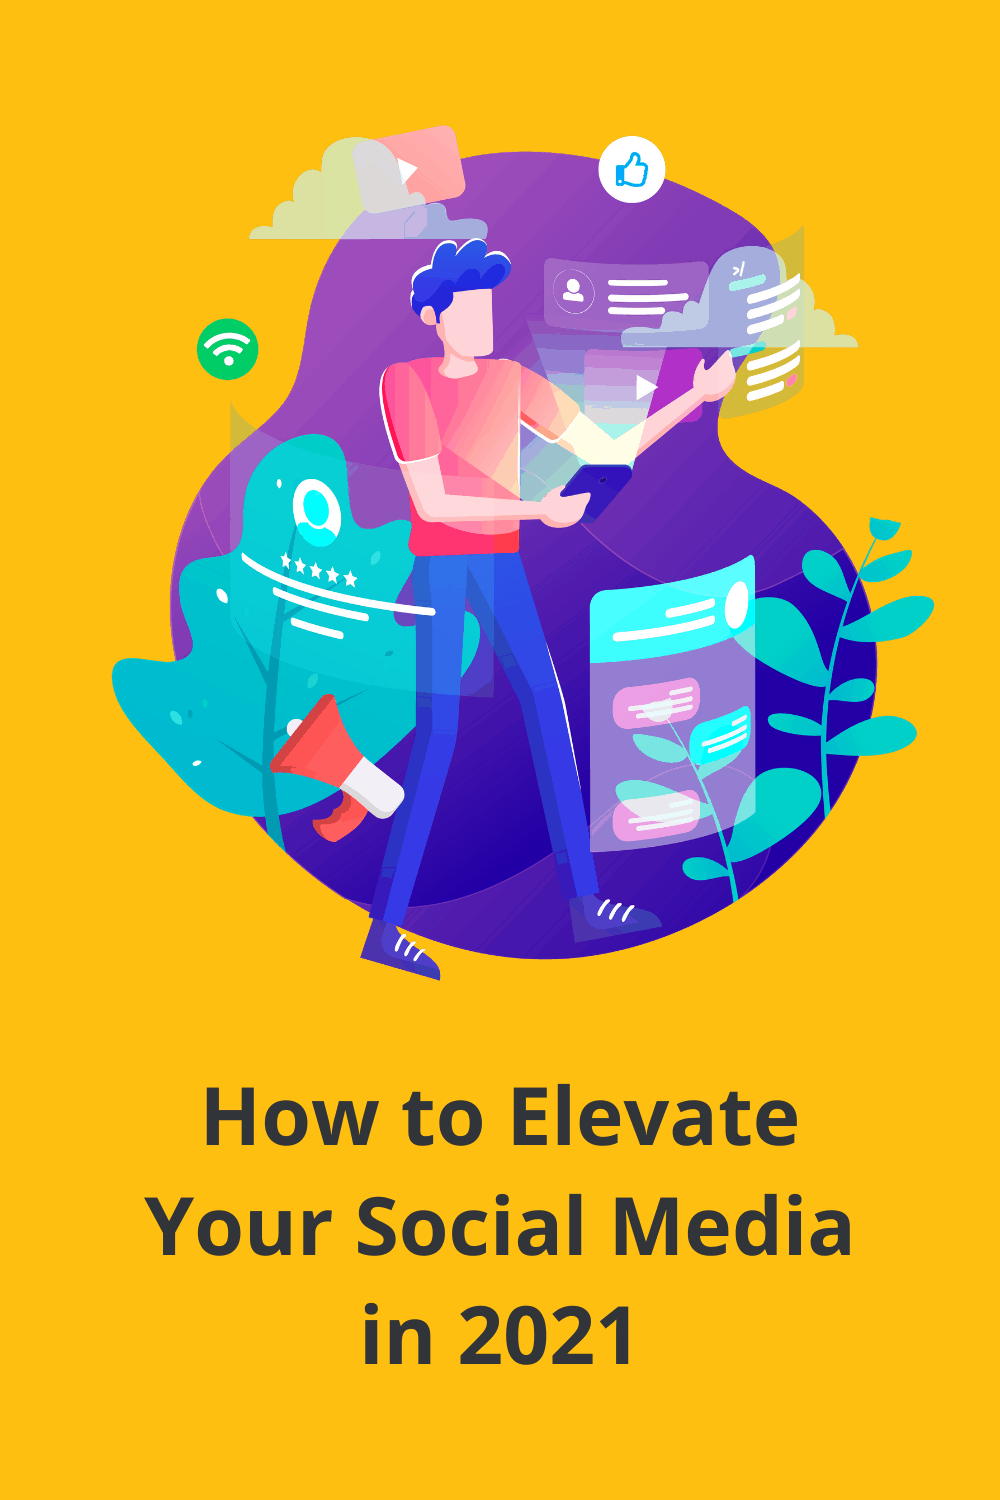 The only way to succeed is to make sure that your social media posts stand out in a crowded playing field. Here are some things that can help your Facebook posts and Tweets stand out in 2021. via @scopedesign